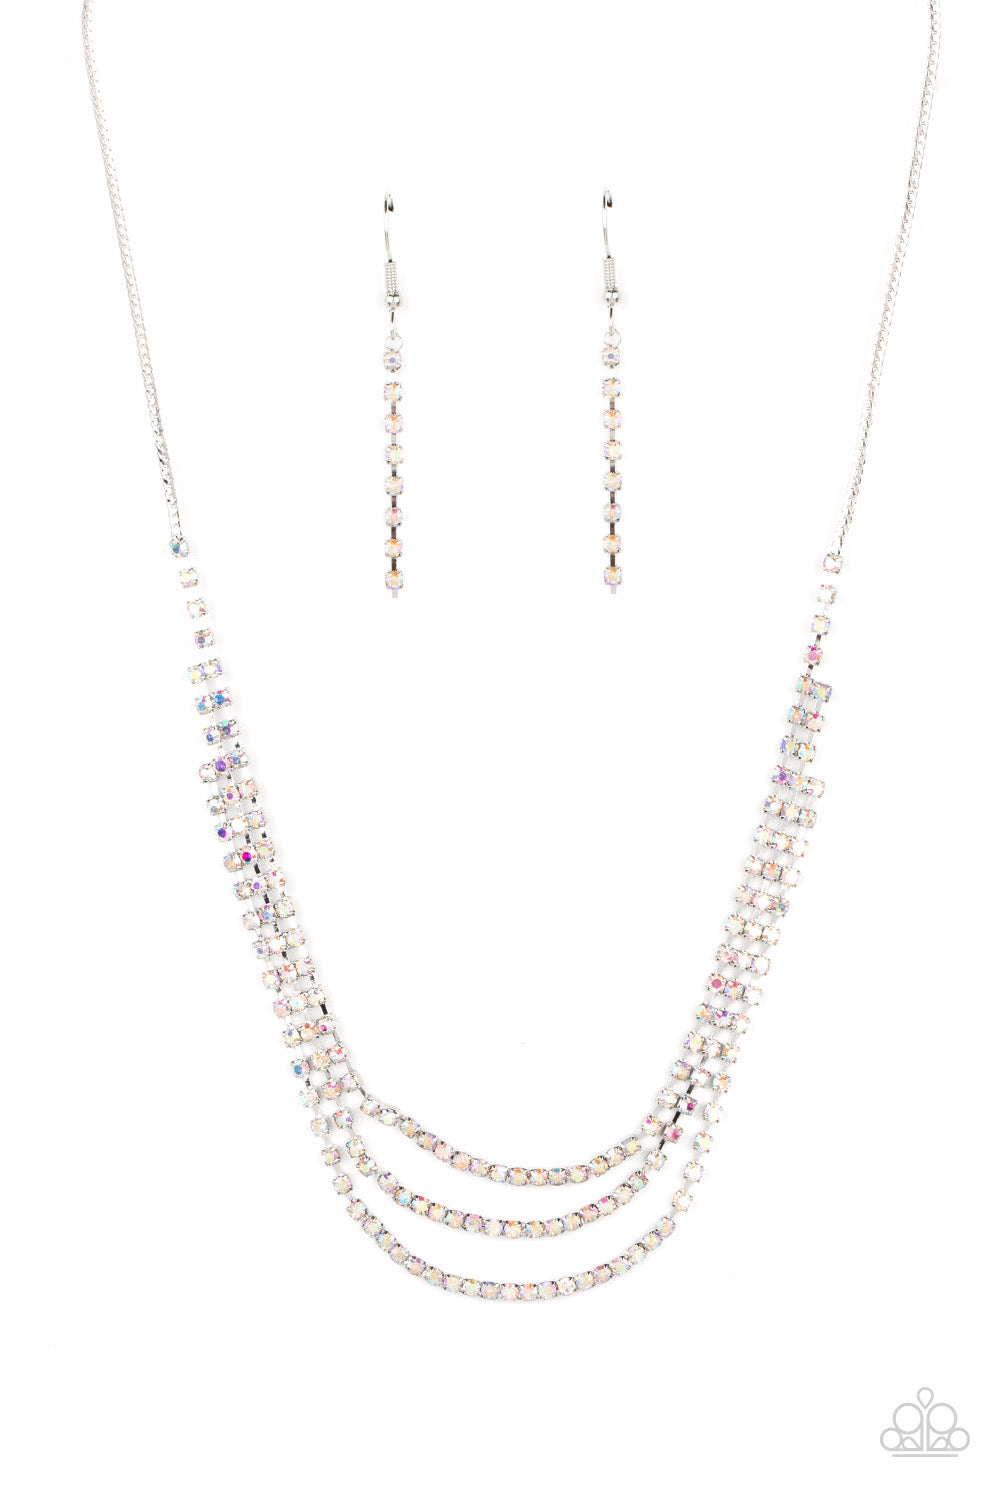 Paparazzi Surreal Sparkle - Multi Necklace - Bling Jewelry Paparazzi Jewelry Images 